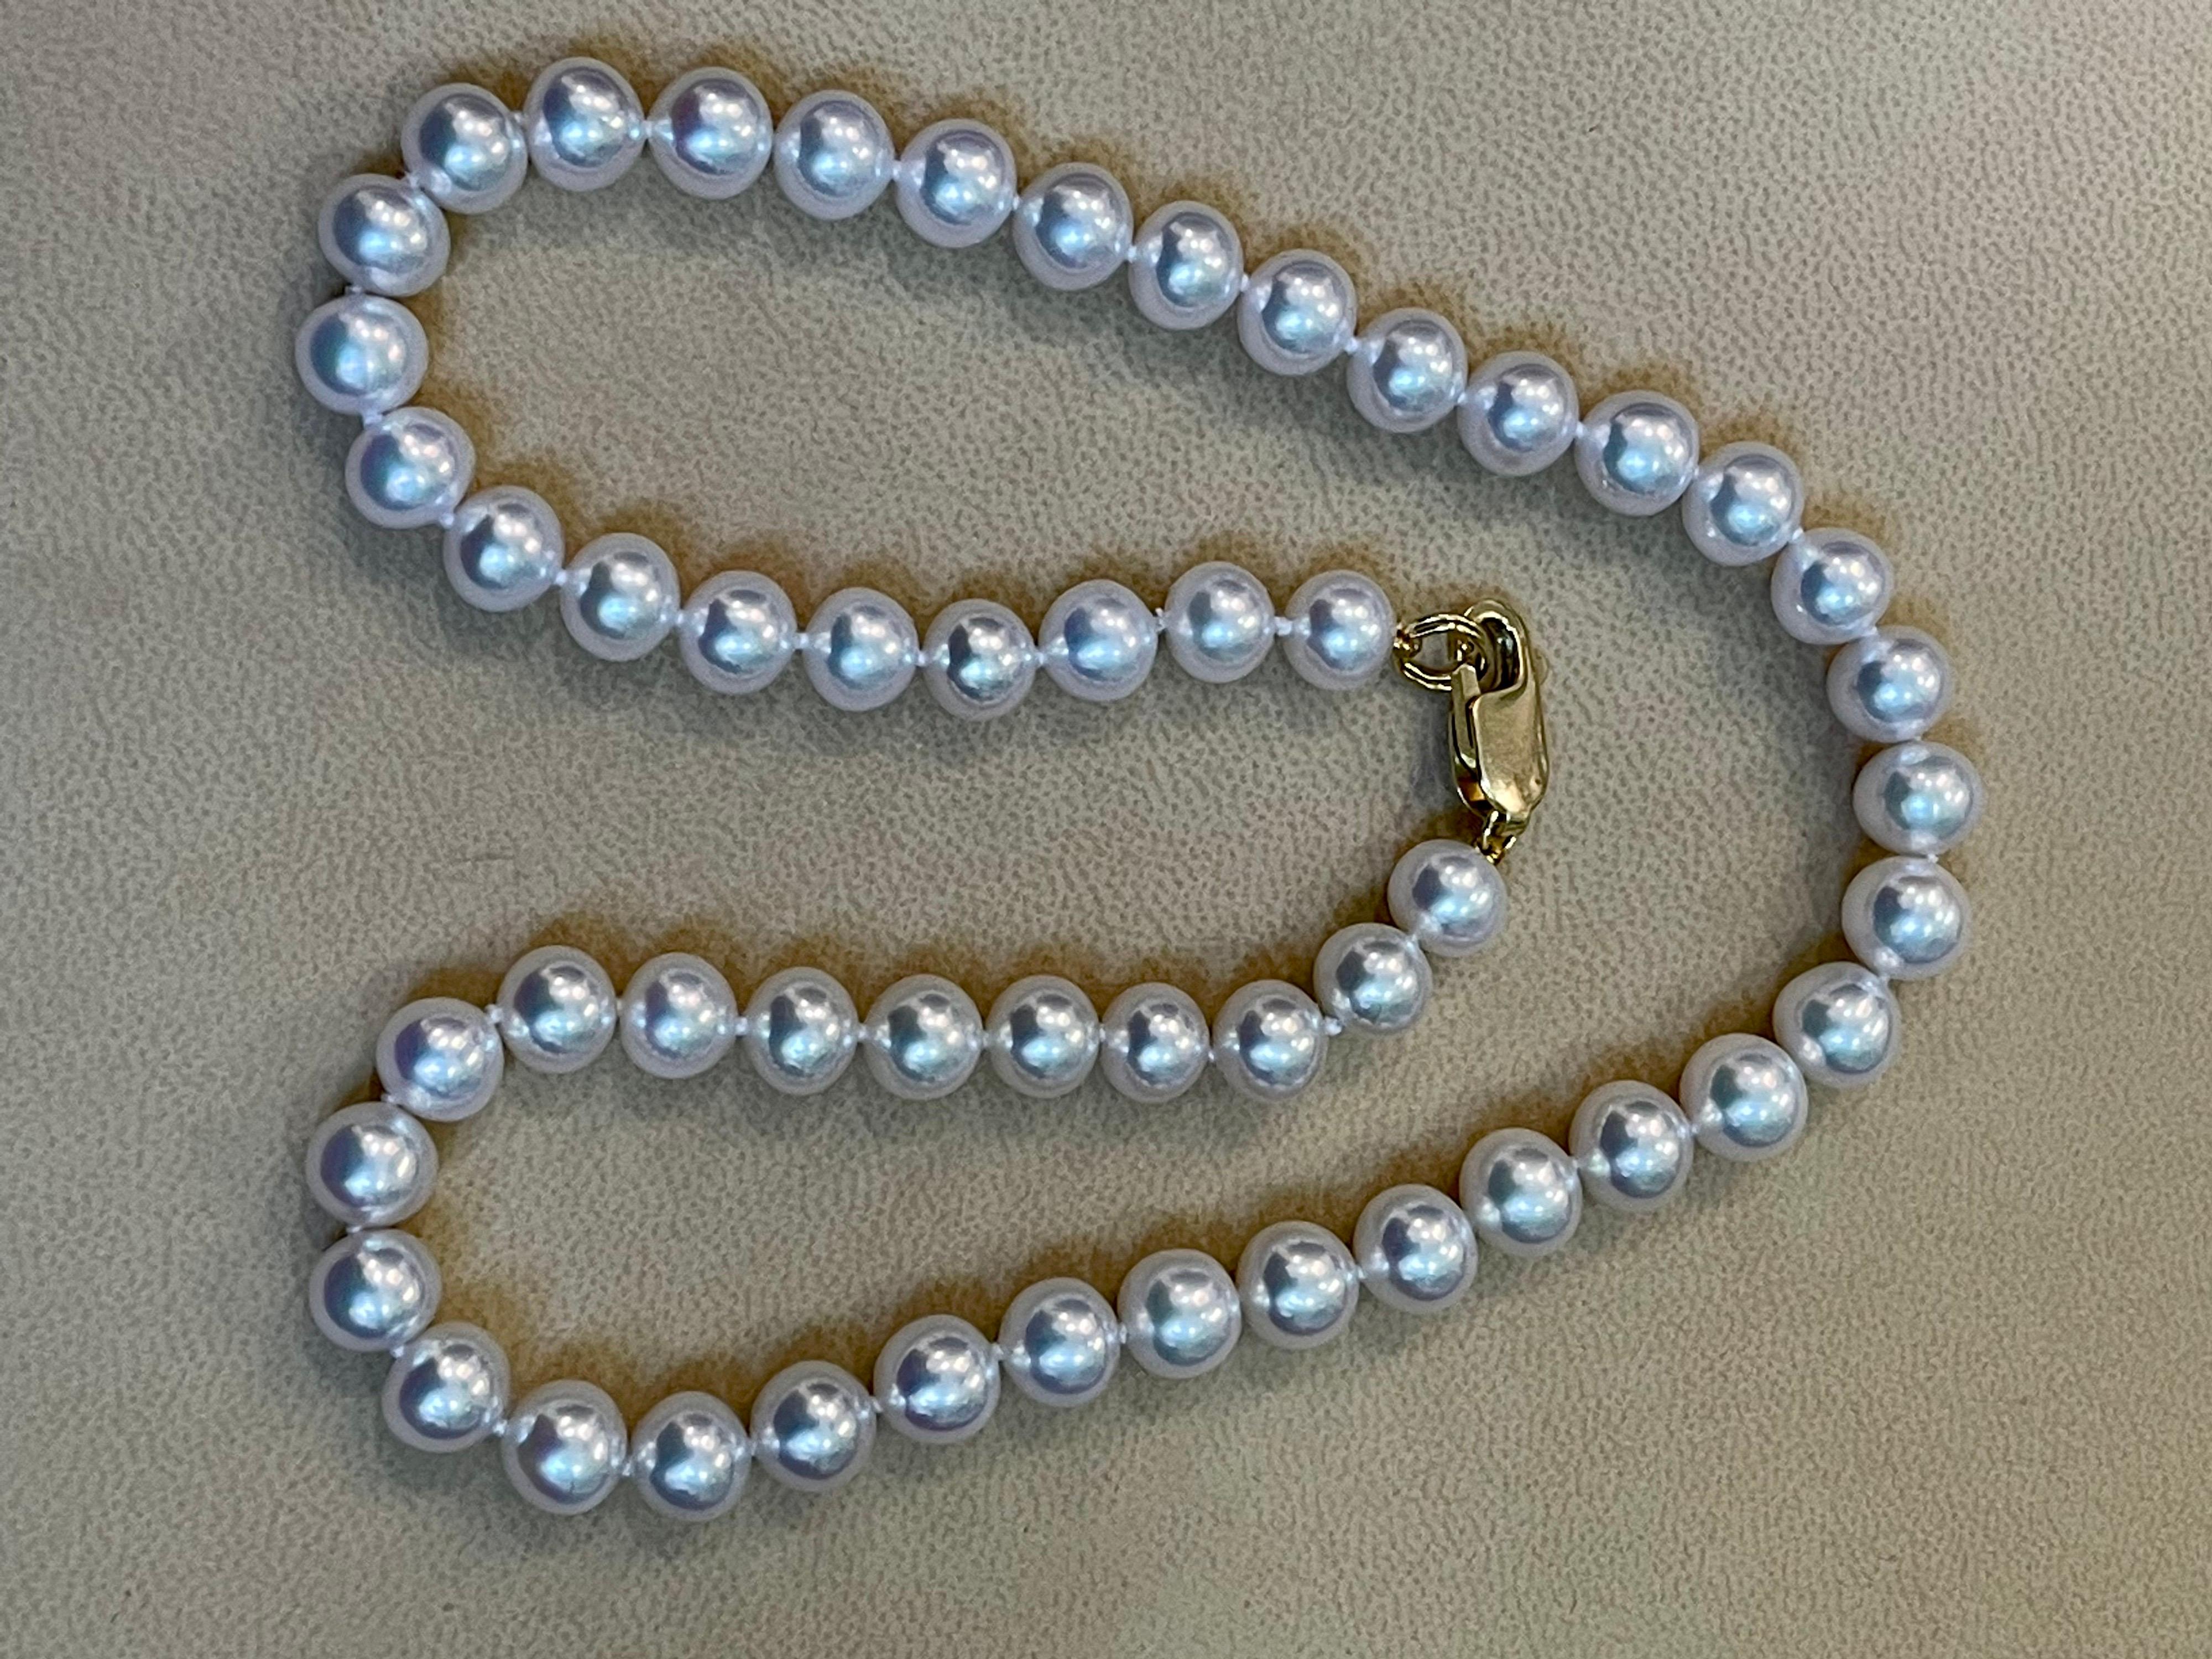 50 Round  8-9 MM Akoya Pearls Strand Necklace Set In 14 Karat Gold Clasp 17 Inch
8-9  mm Pearls  
14 Karat yellow gold  Lobster clasp
Estate piece 
Total weight of the necklace is  41.5 Grams
length of the necklace is 16 inch to 17 inch
Luster of